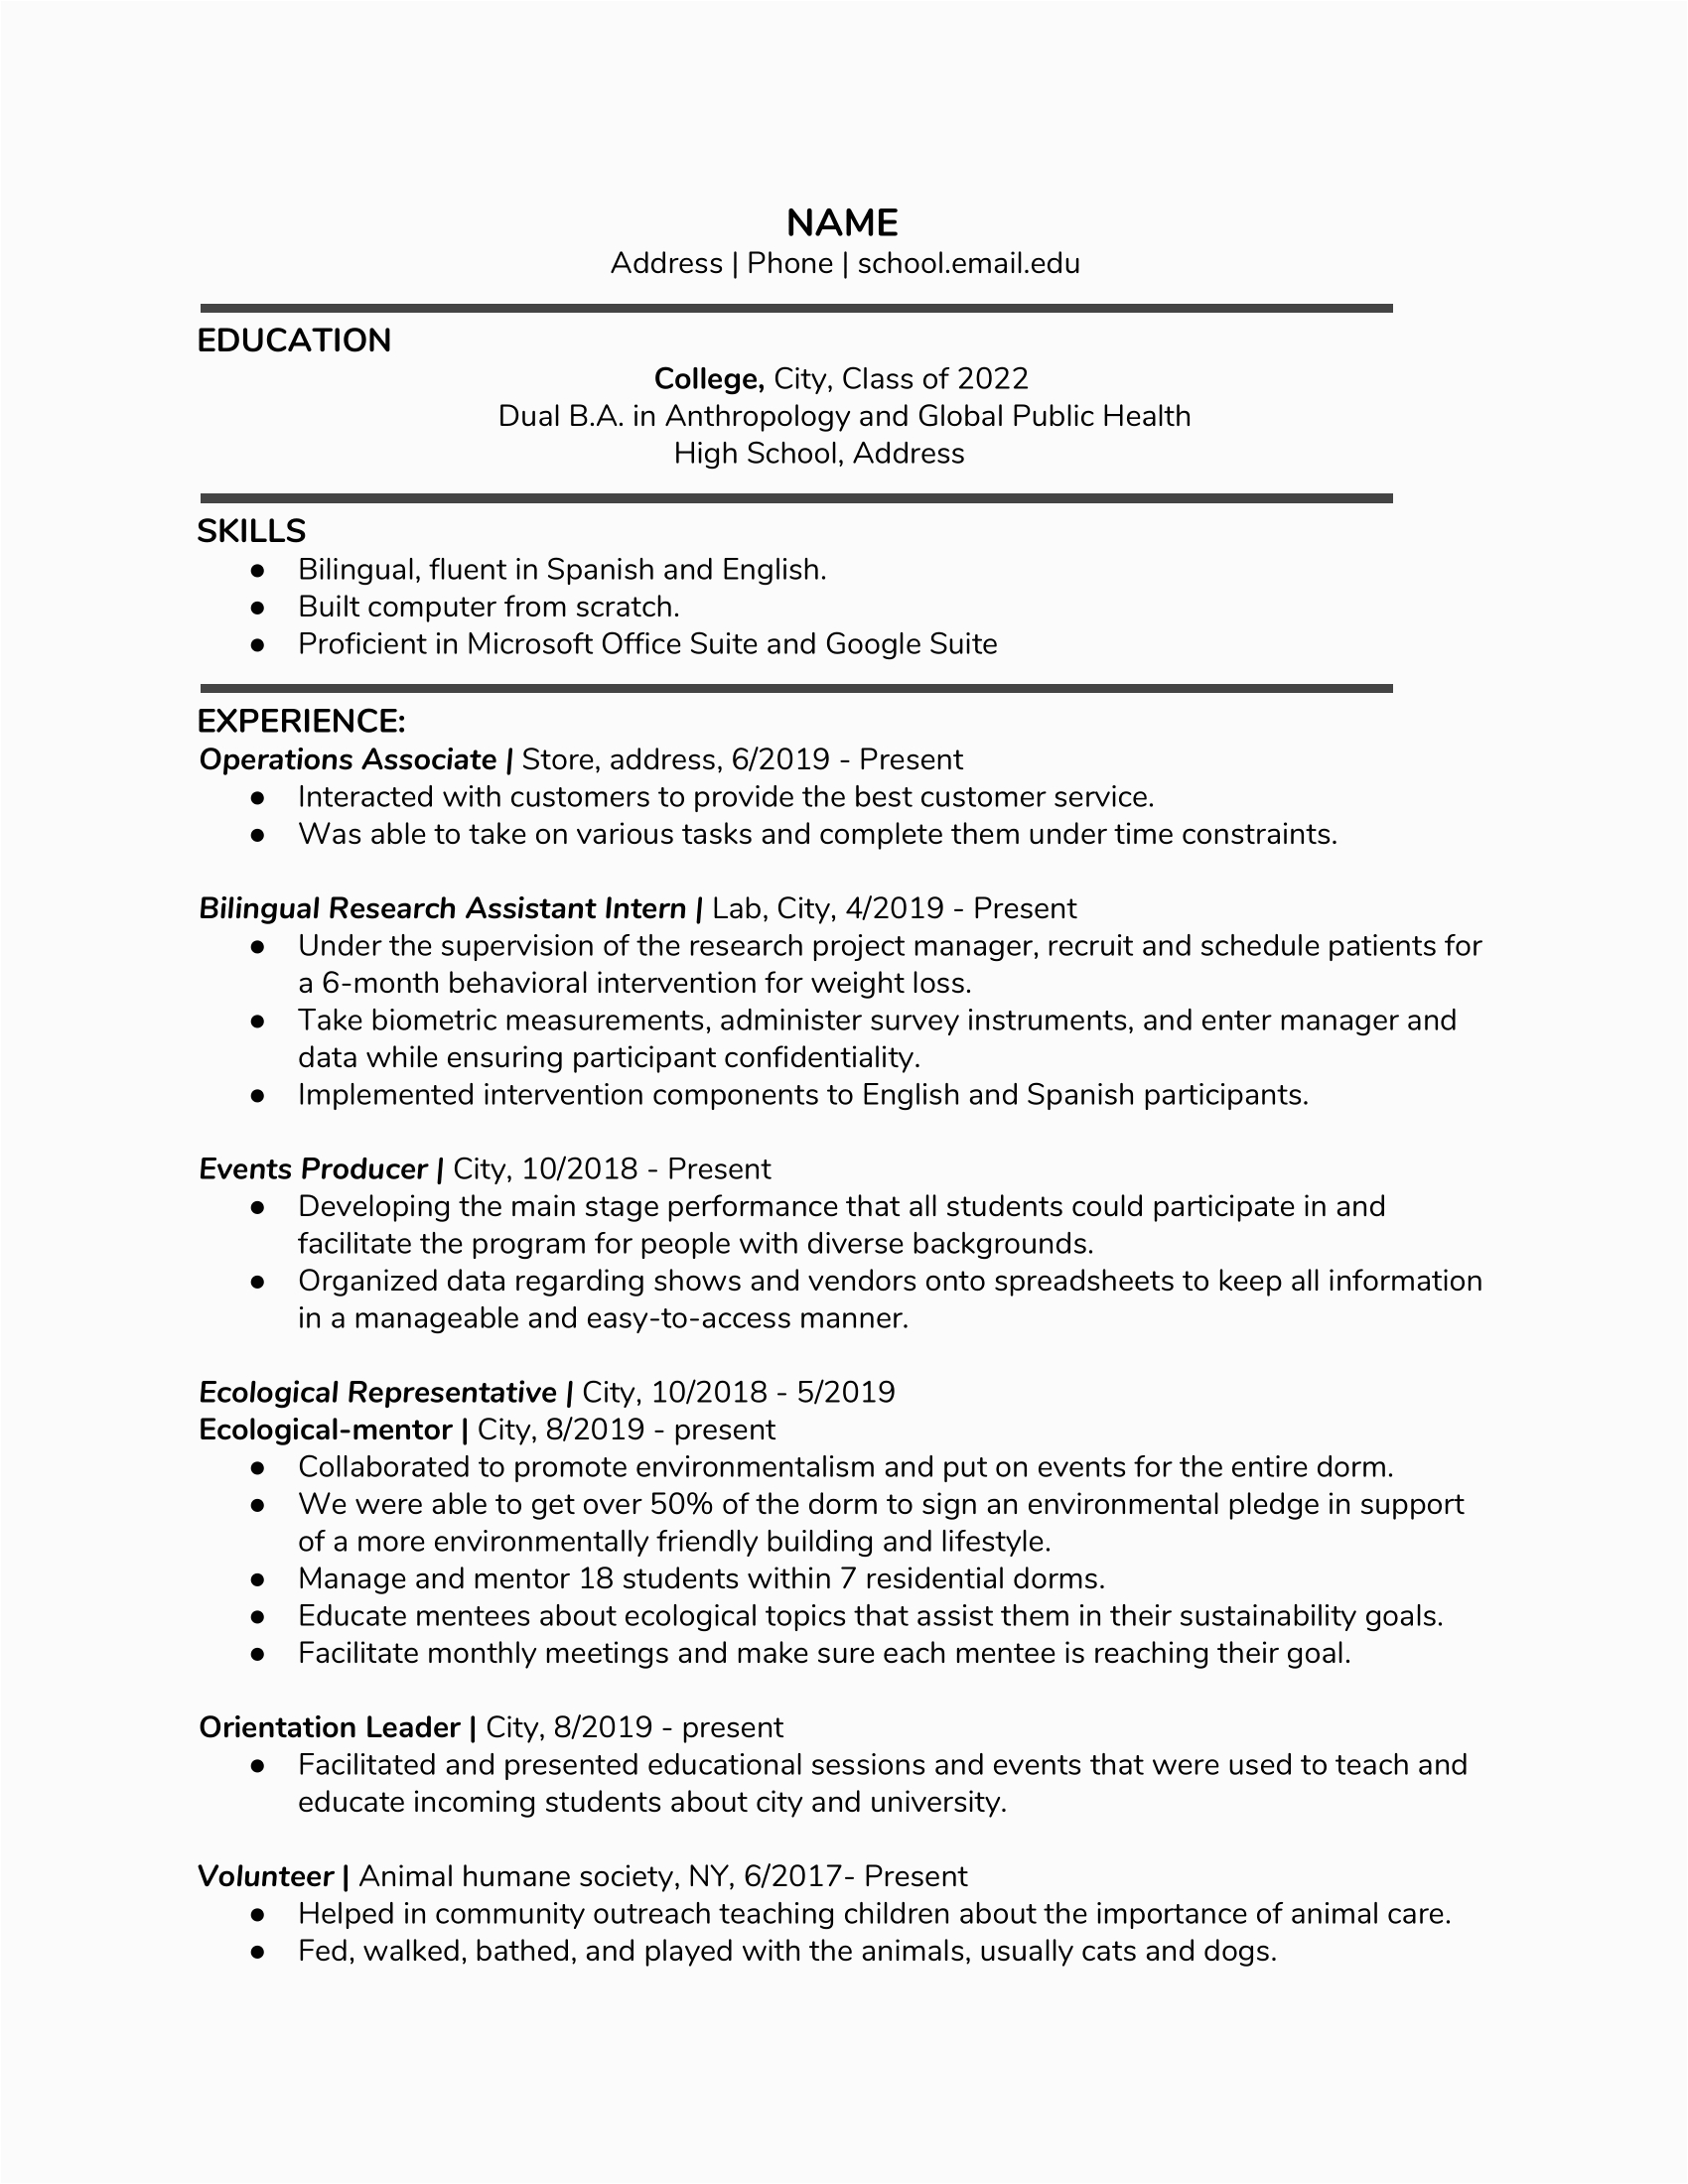 Sample Resume for sophomores In College College sophomore Trying to An Internship at A Local Zoo or